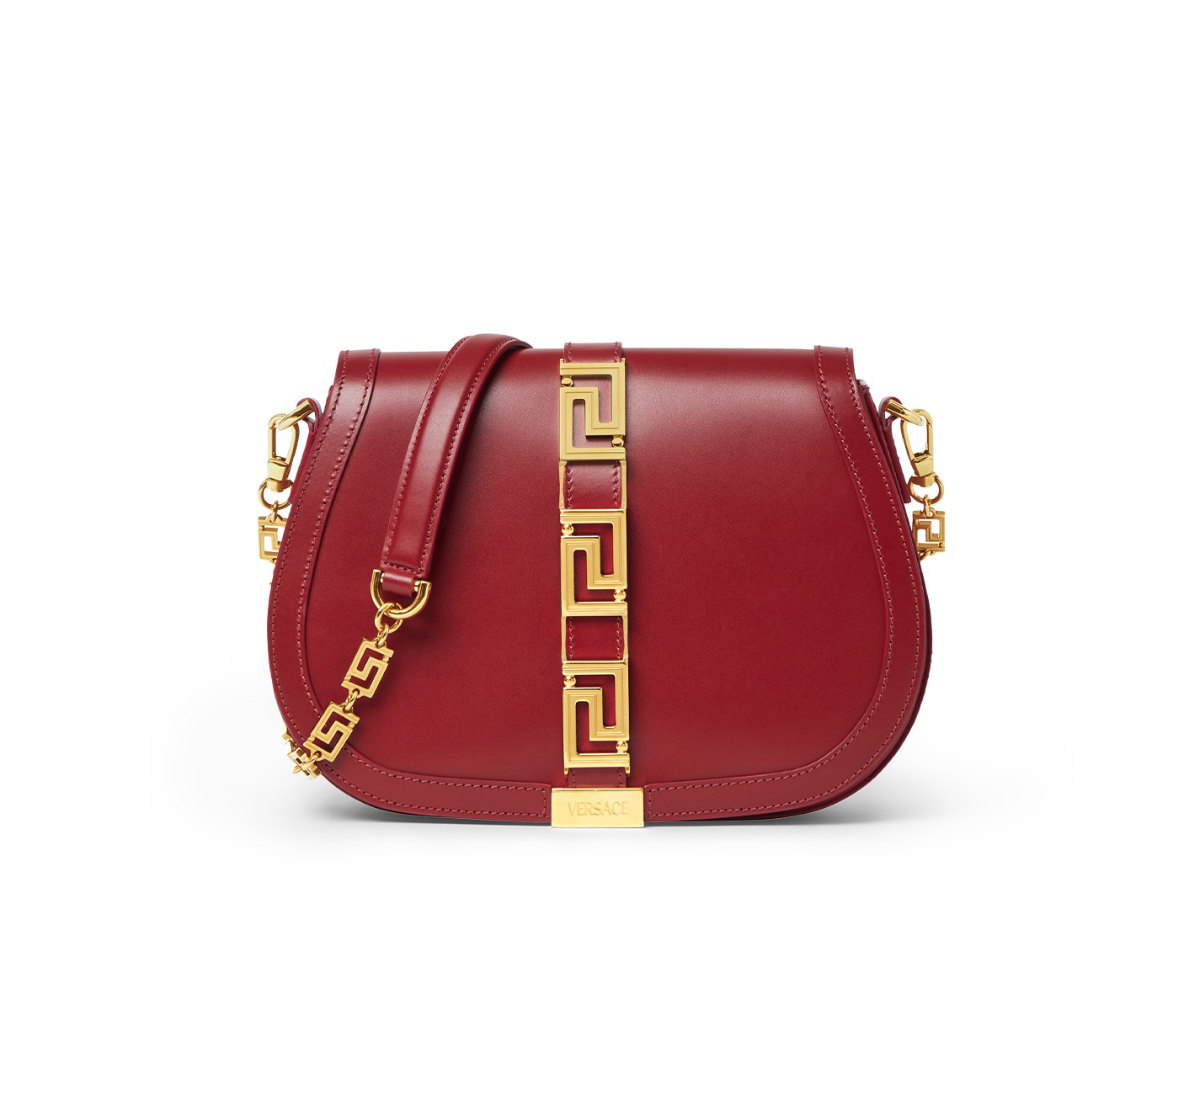 Versace Introduces A New Line Of Bags & Accessories: Greca Goddess